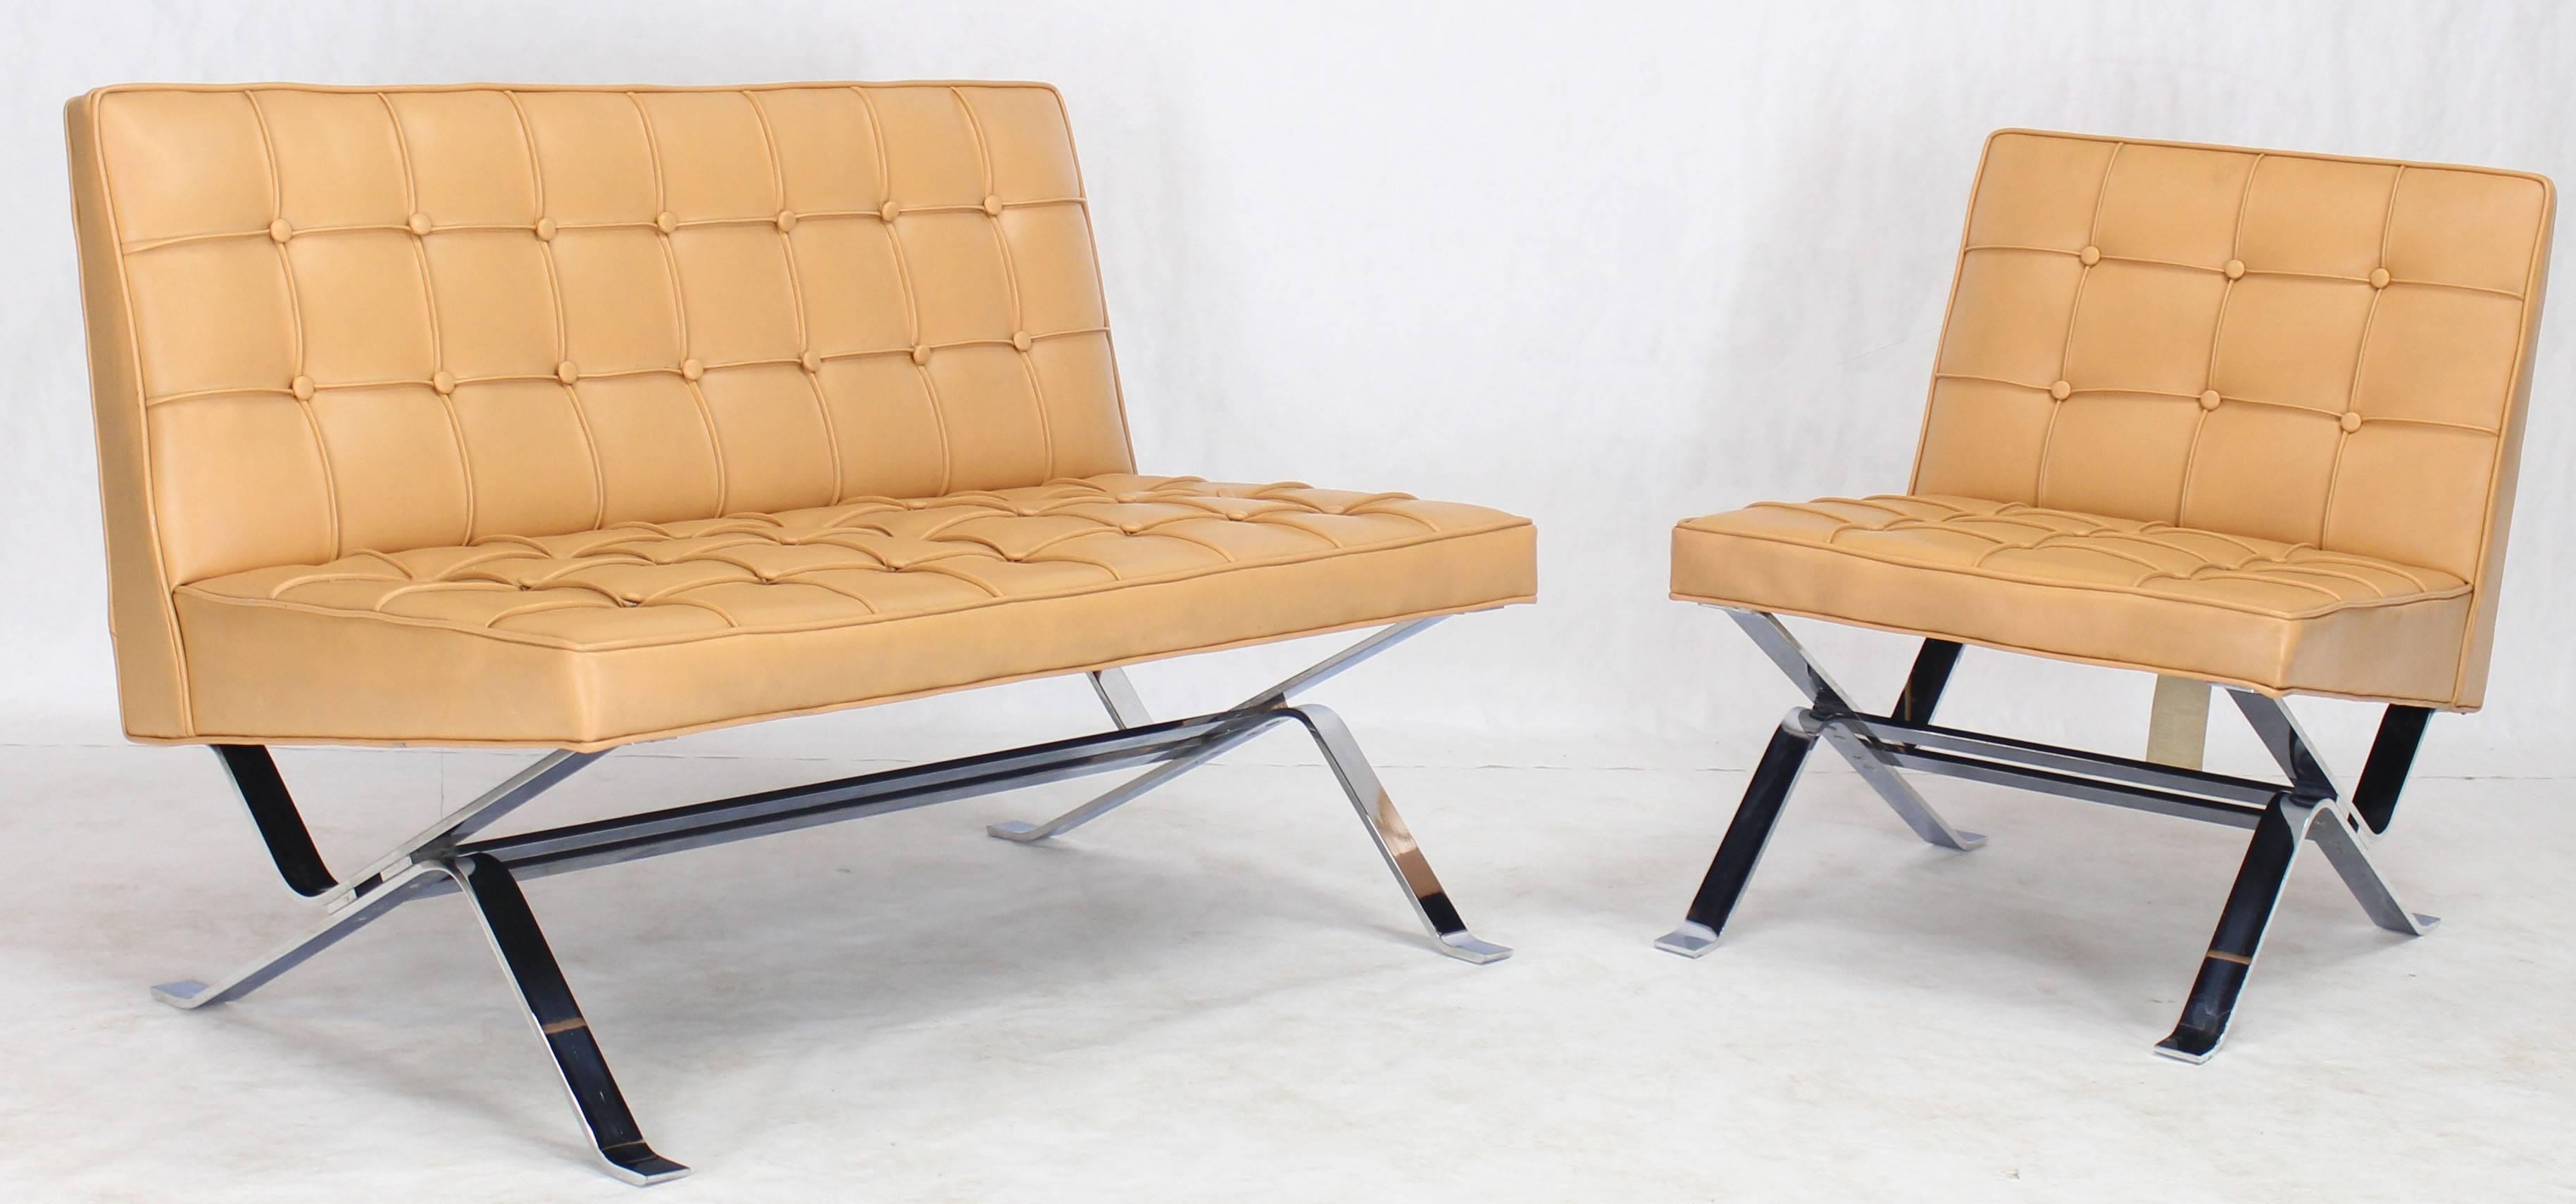 Mid-century modern chrome metal bent Z-base tufted upholstery living room set. The lounge chair width is 25